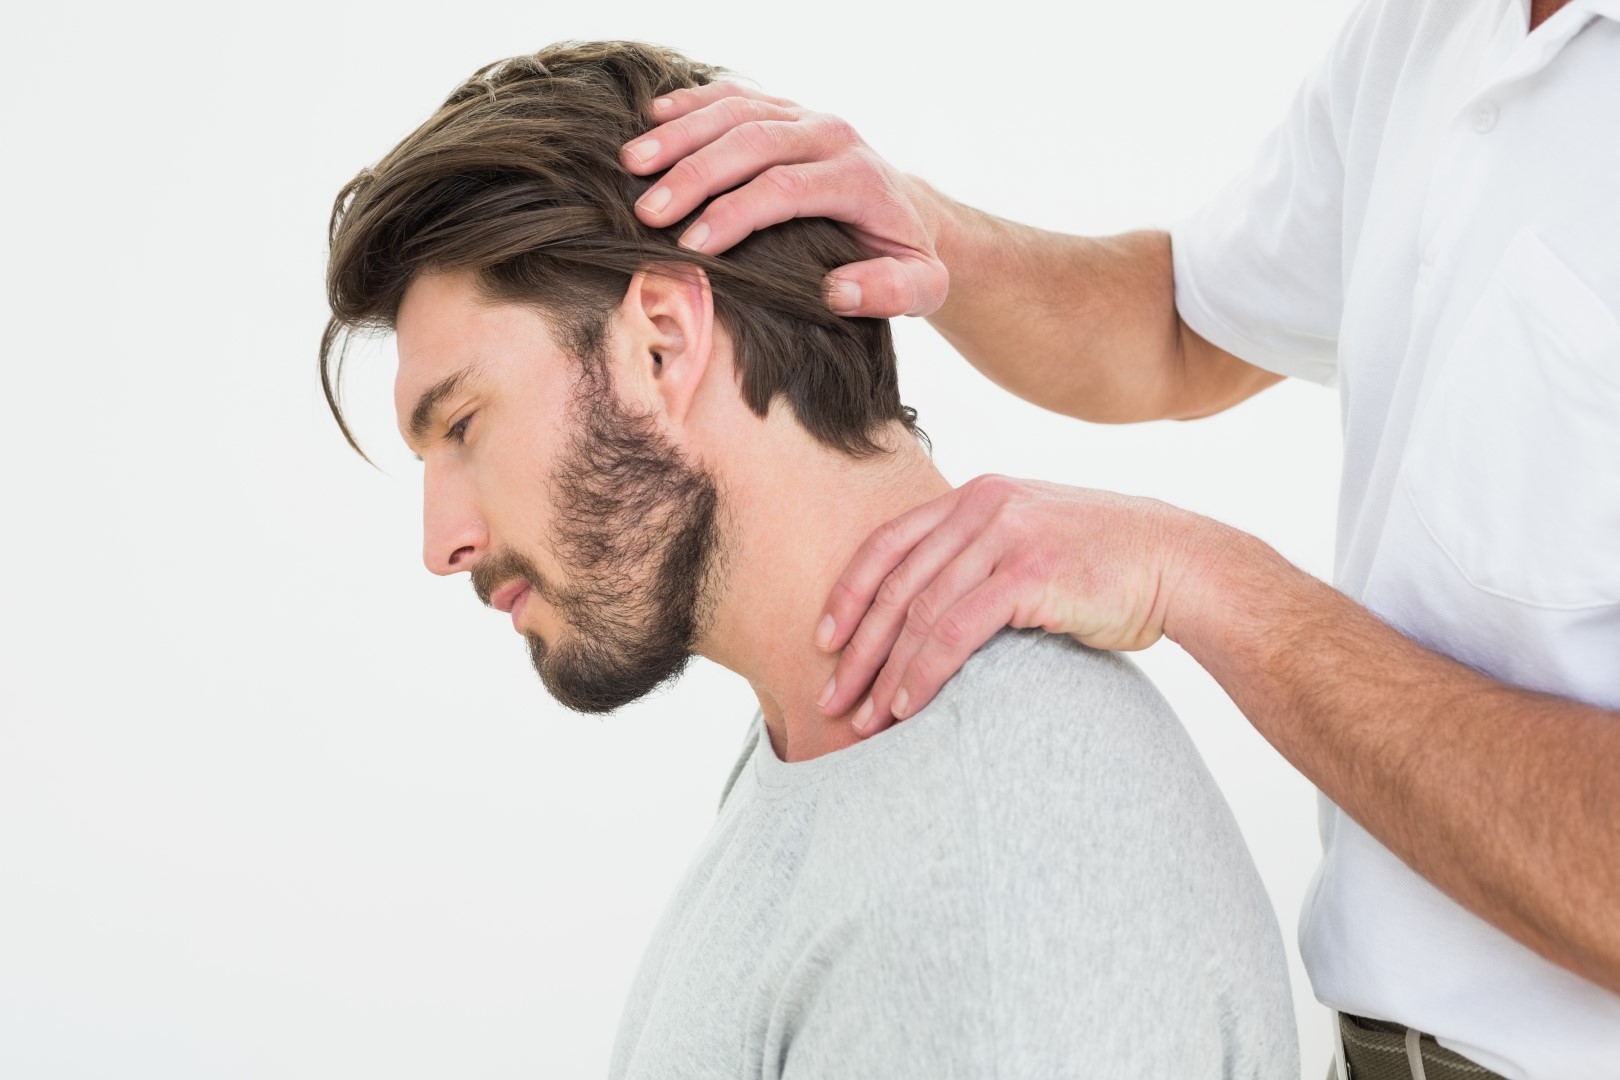 Can Trigger Point Injections Treat Chronic Neck Pain?